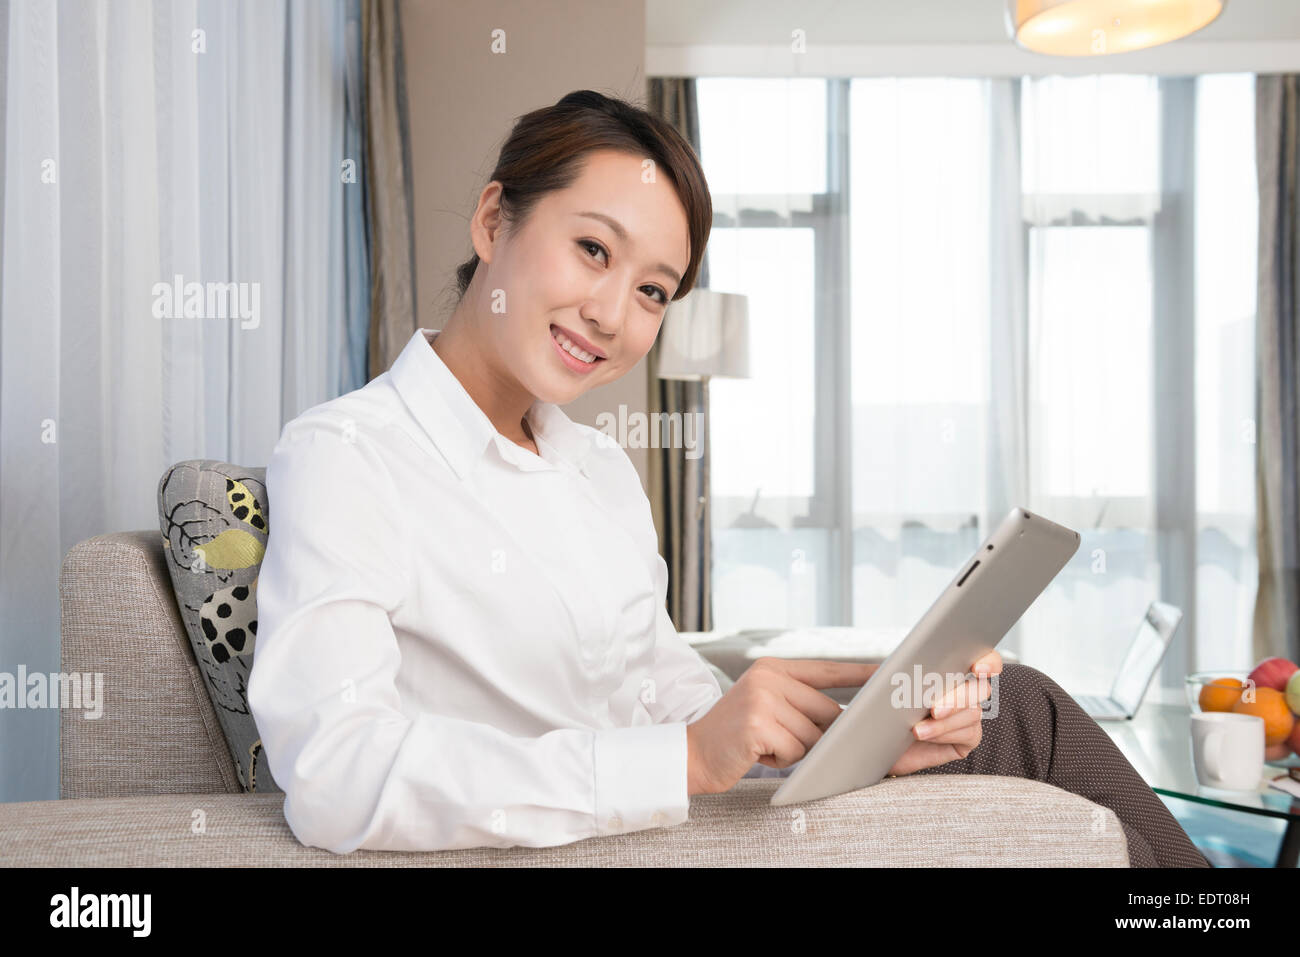 Young woman using tablet in living room Stock Photo